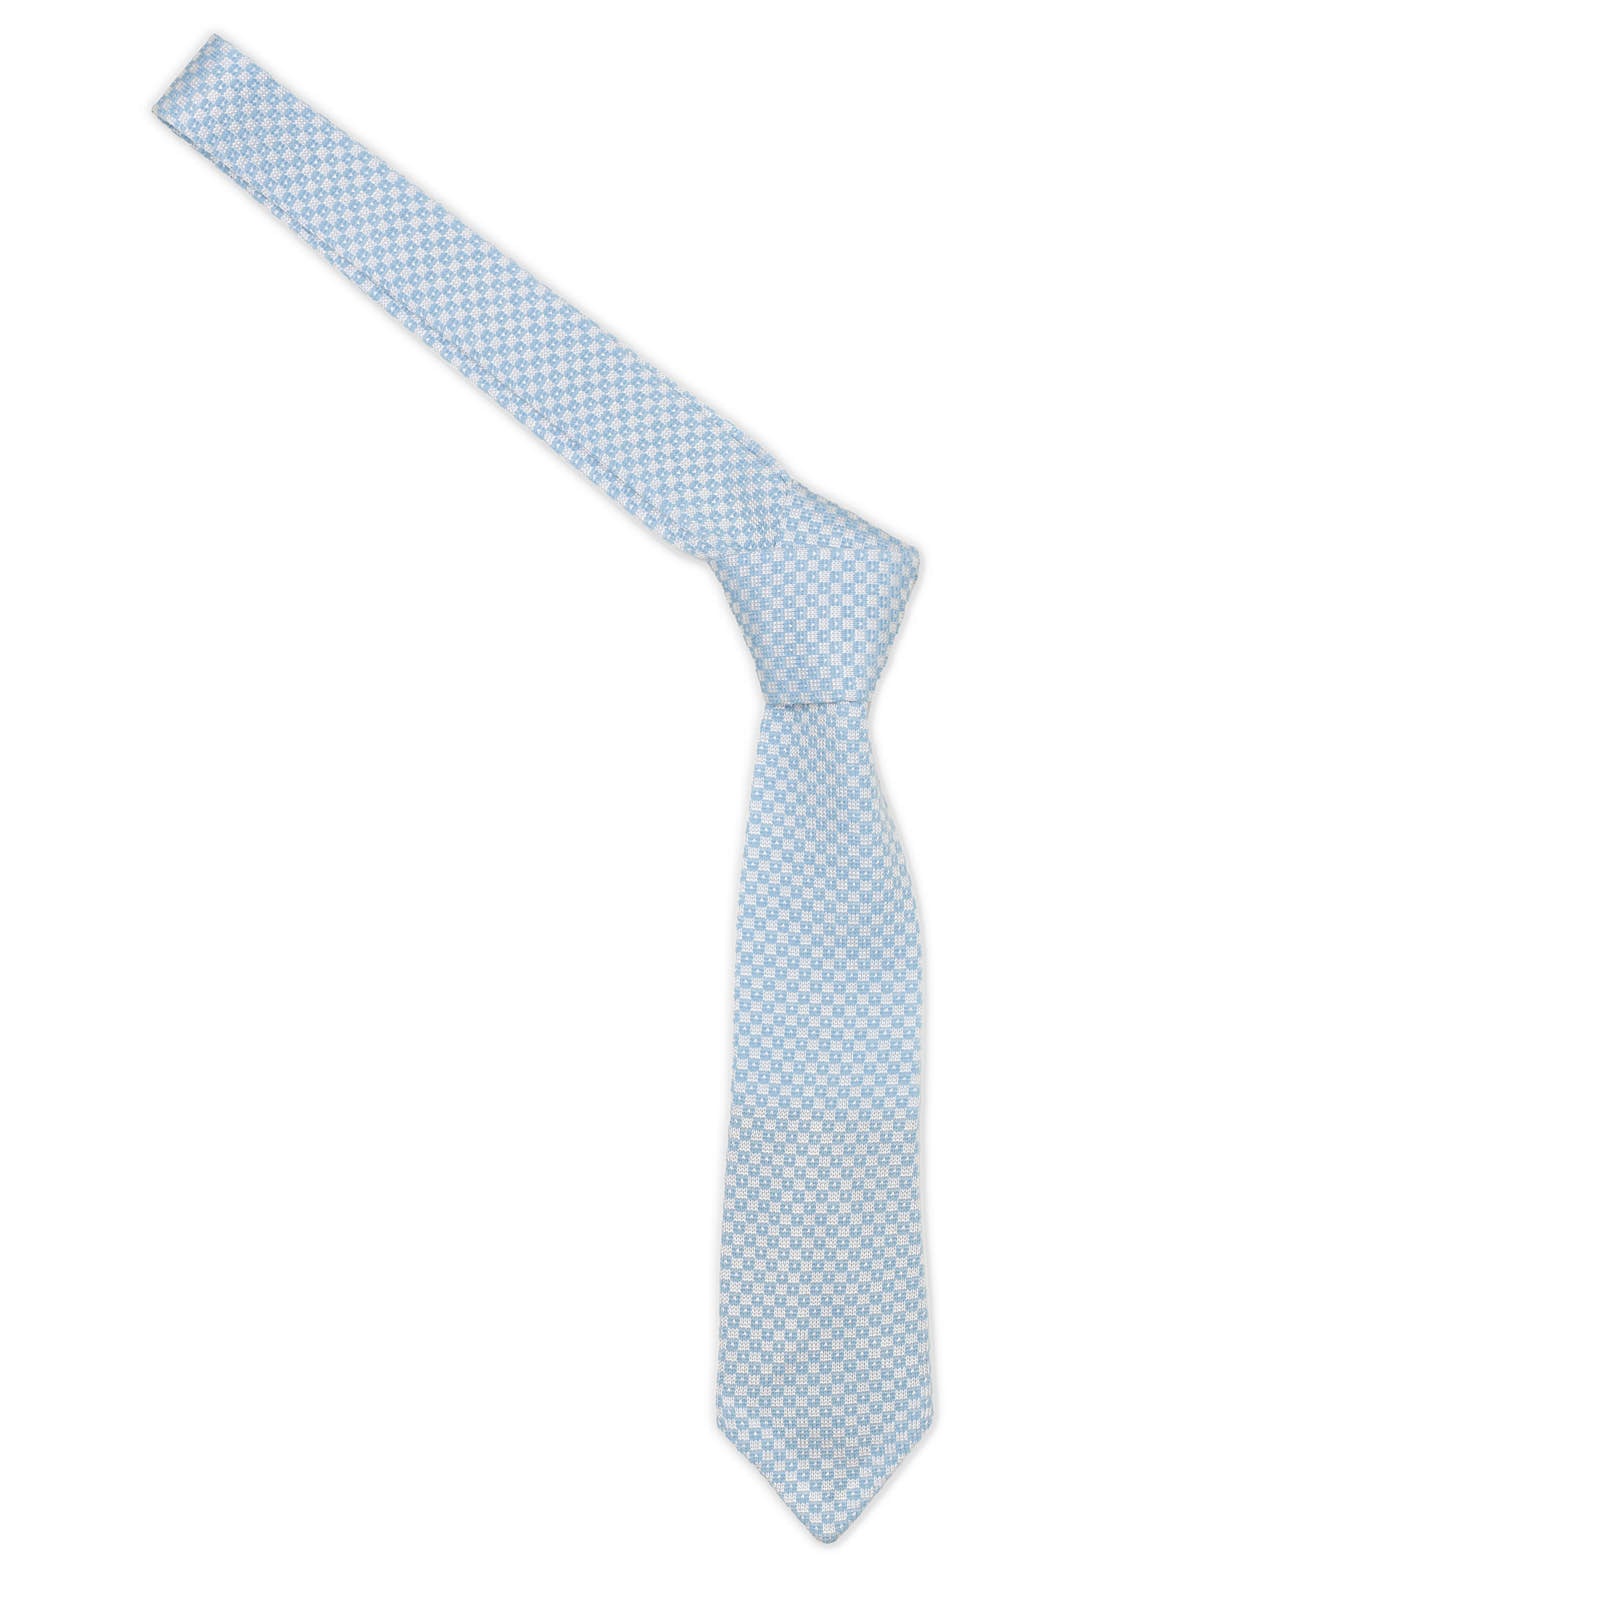 VANNUCCI MILANO Light Blue Checked Wool Knit Tie NEW